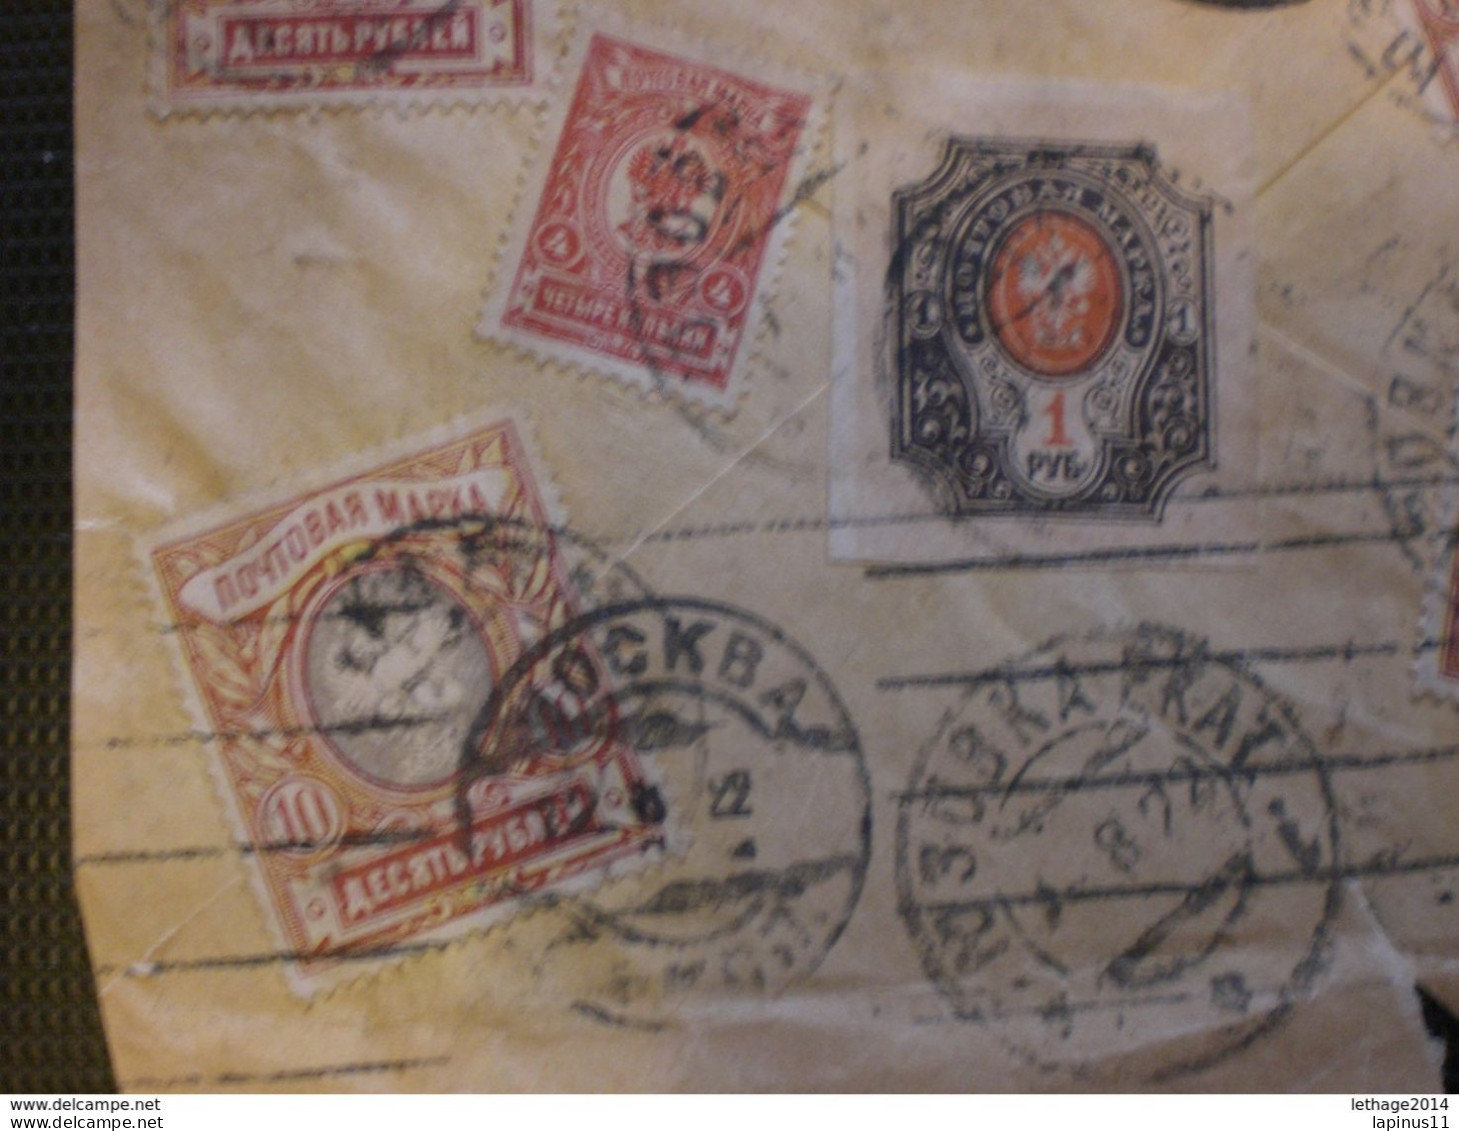 RUSSIA RUSSIE РОССИЯ STAMPS COVER 1922 REGISTER MAIL RUSSIA TO ITALY OVER STAMPS FULL RRR RIF.TAGG. (127) - Lettres & Documents